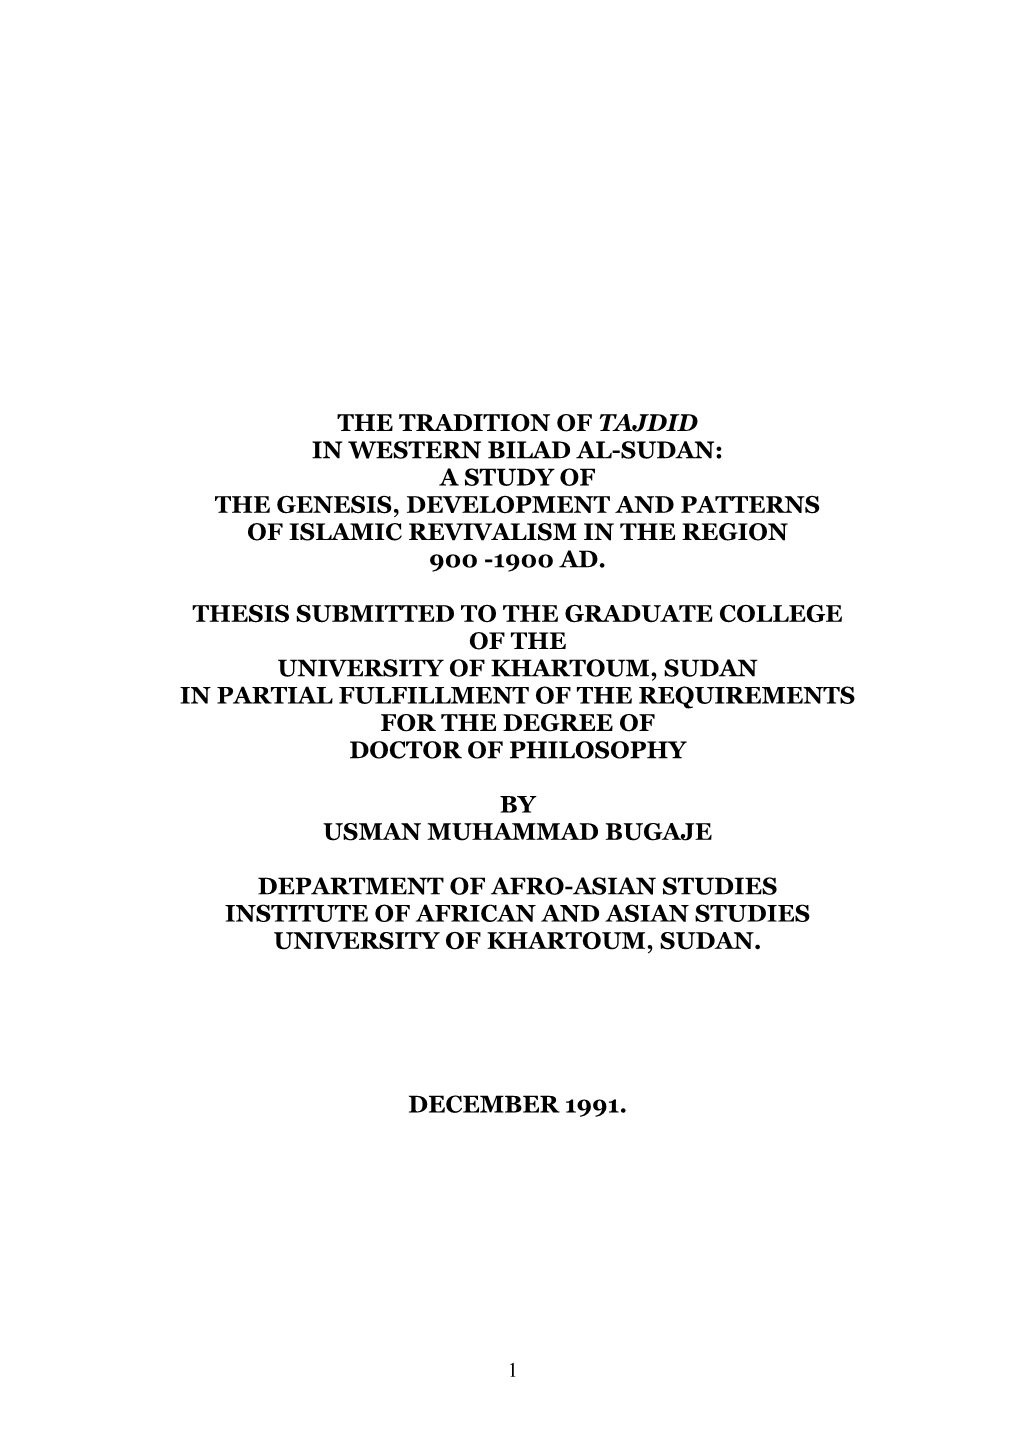 The Tradition of Tajdid in Western Bilad Al-Sudan: a Study of the Genesis, Development and Patterns of Islamic Revivalism in the Region 900 -1900 Ad